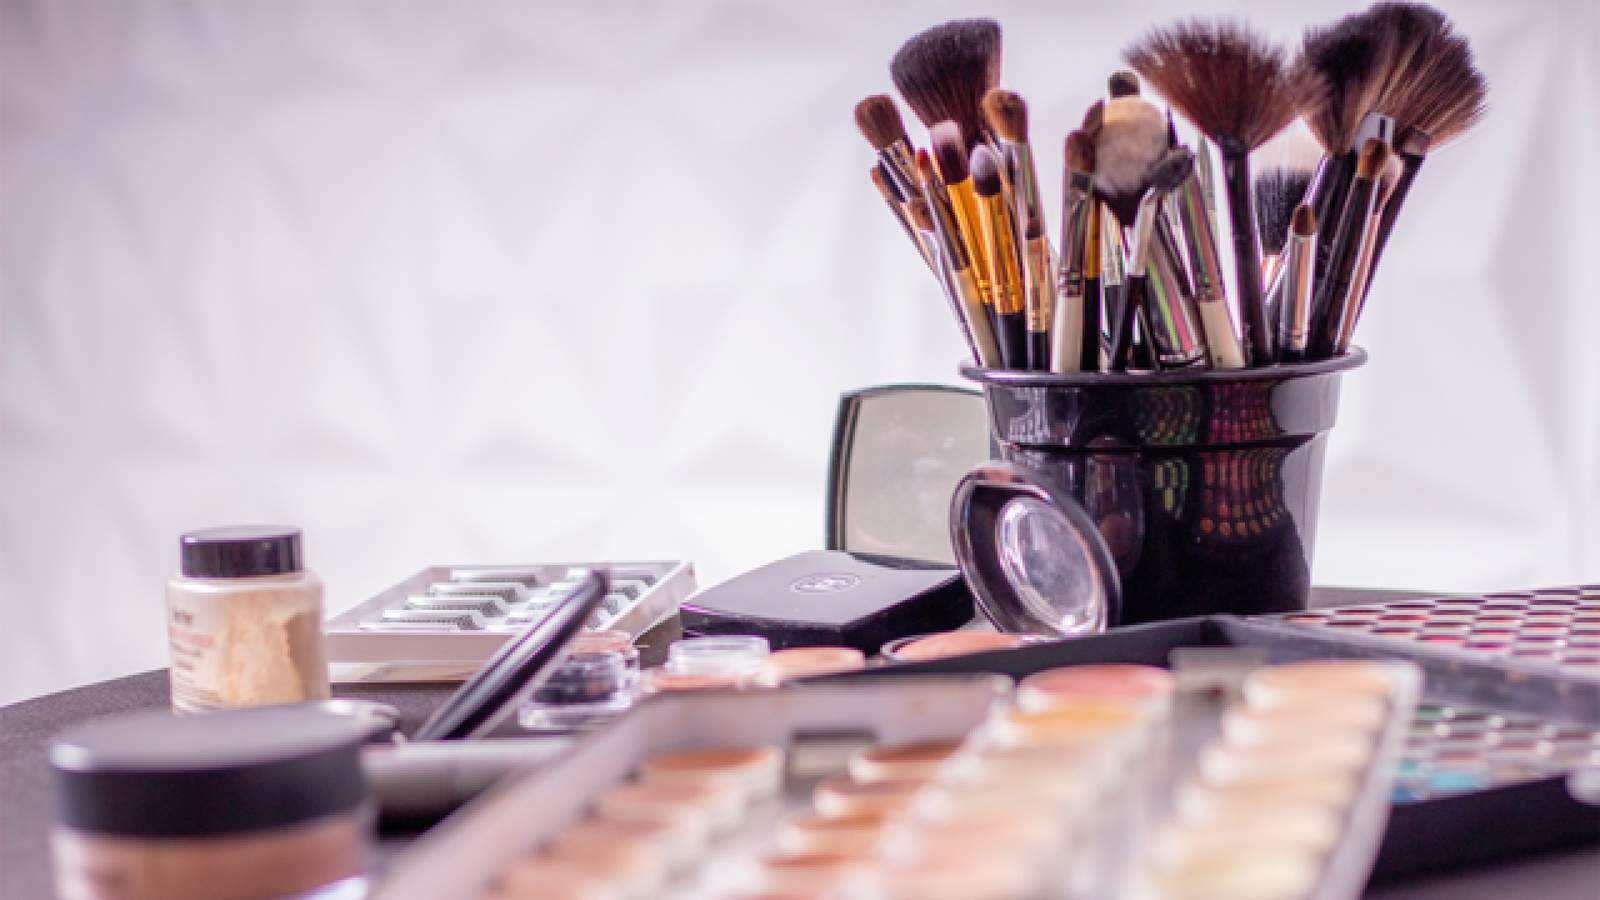 Dangers of knock-off makeup and skincare products